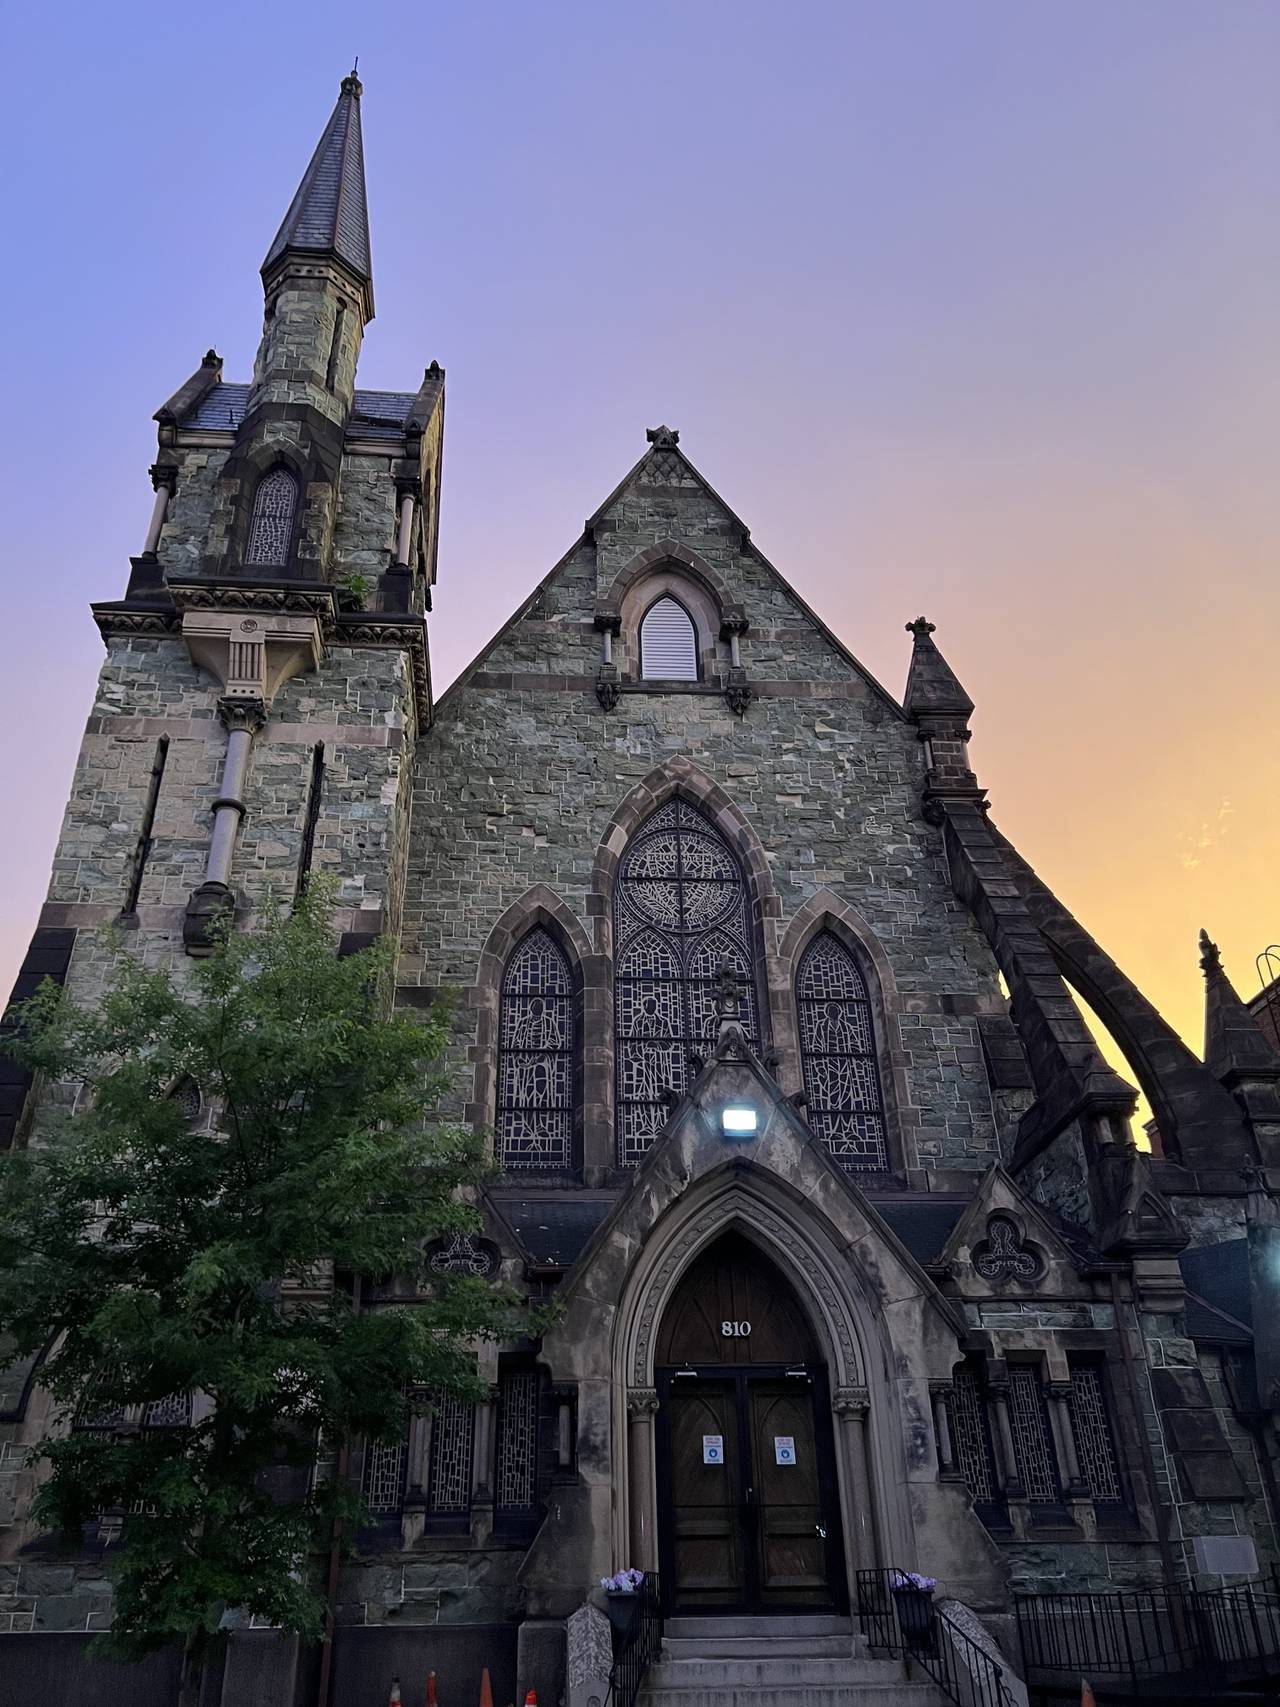 An old stone church sits against a purple and orange sky.